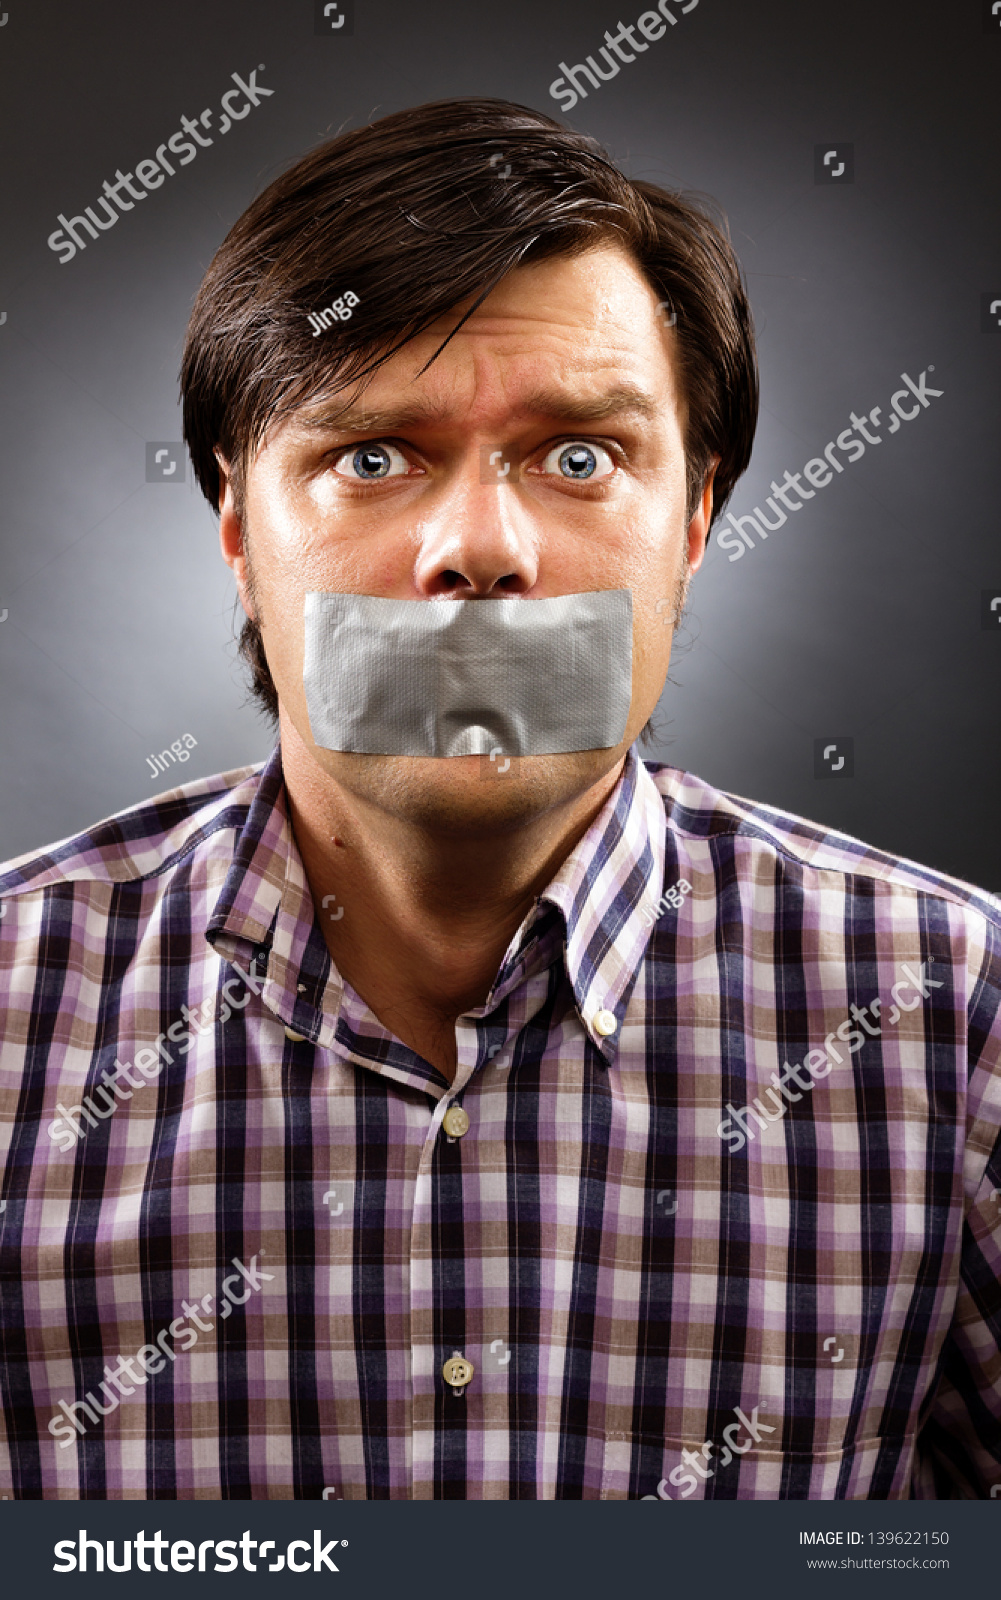 Young Man Duct Tape Over His Stock Photo 139622150 | Shutterstock